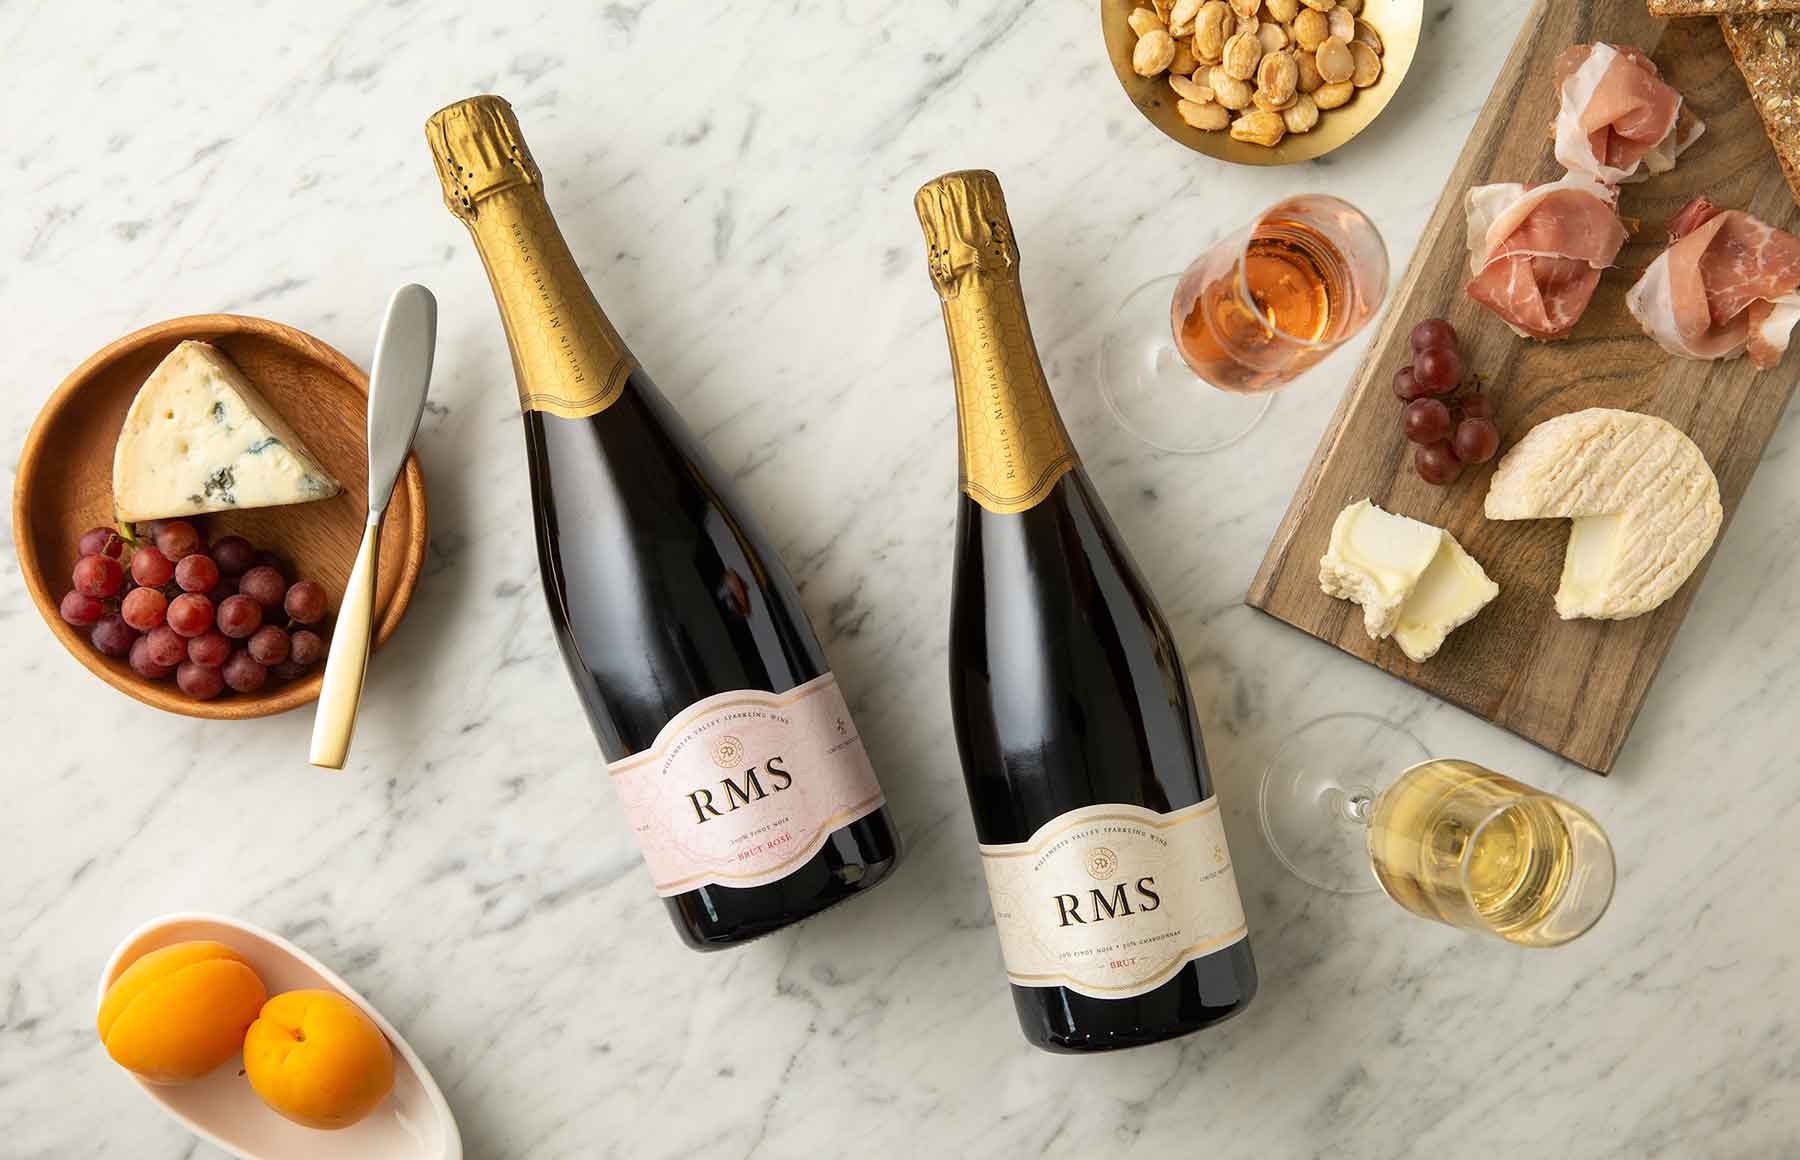 Bottles of RMS Brut with food nearby.